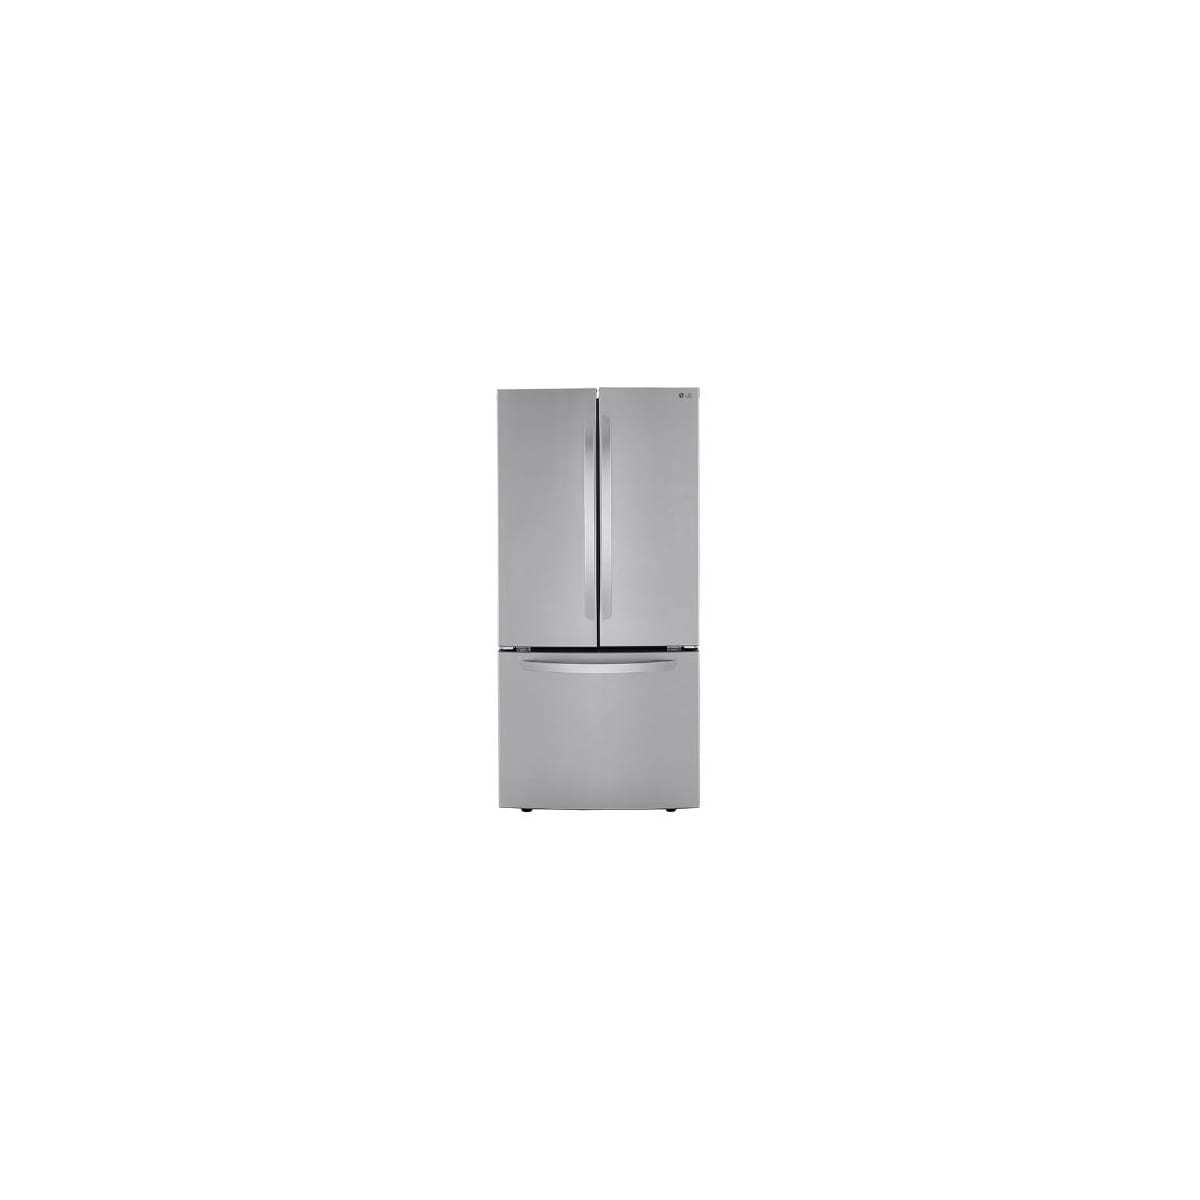 LG LRFCS25D3S 25 Cu. ft. Stainless French Door Refrigerator